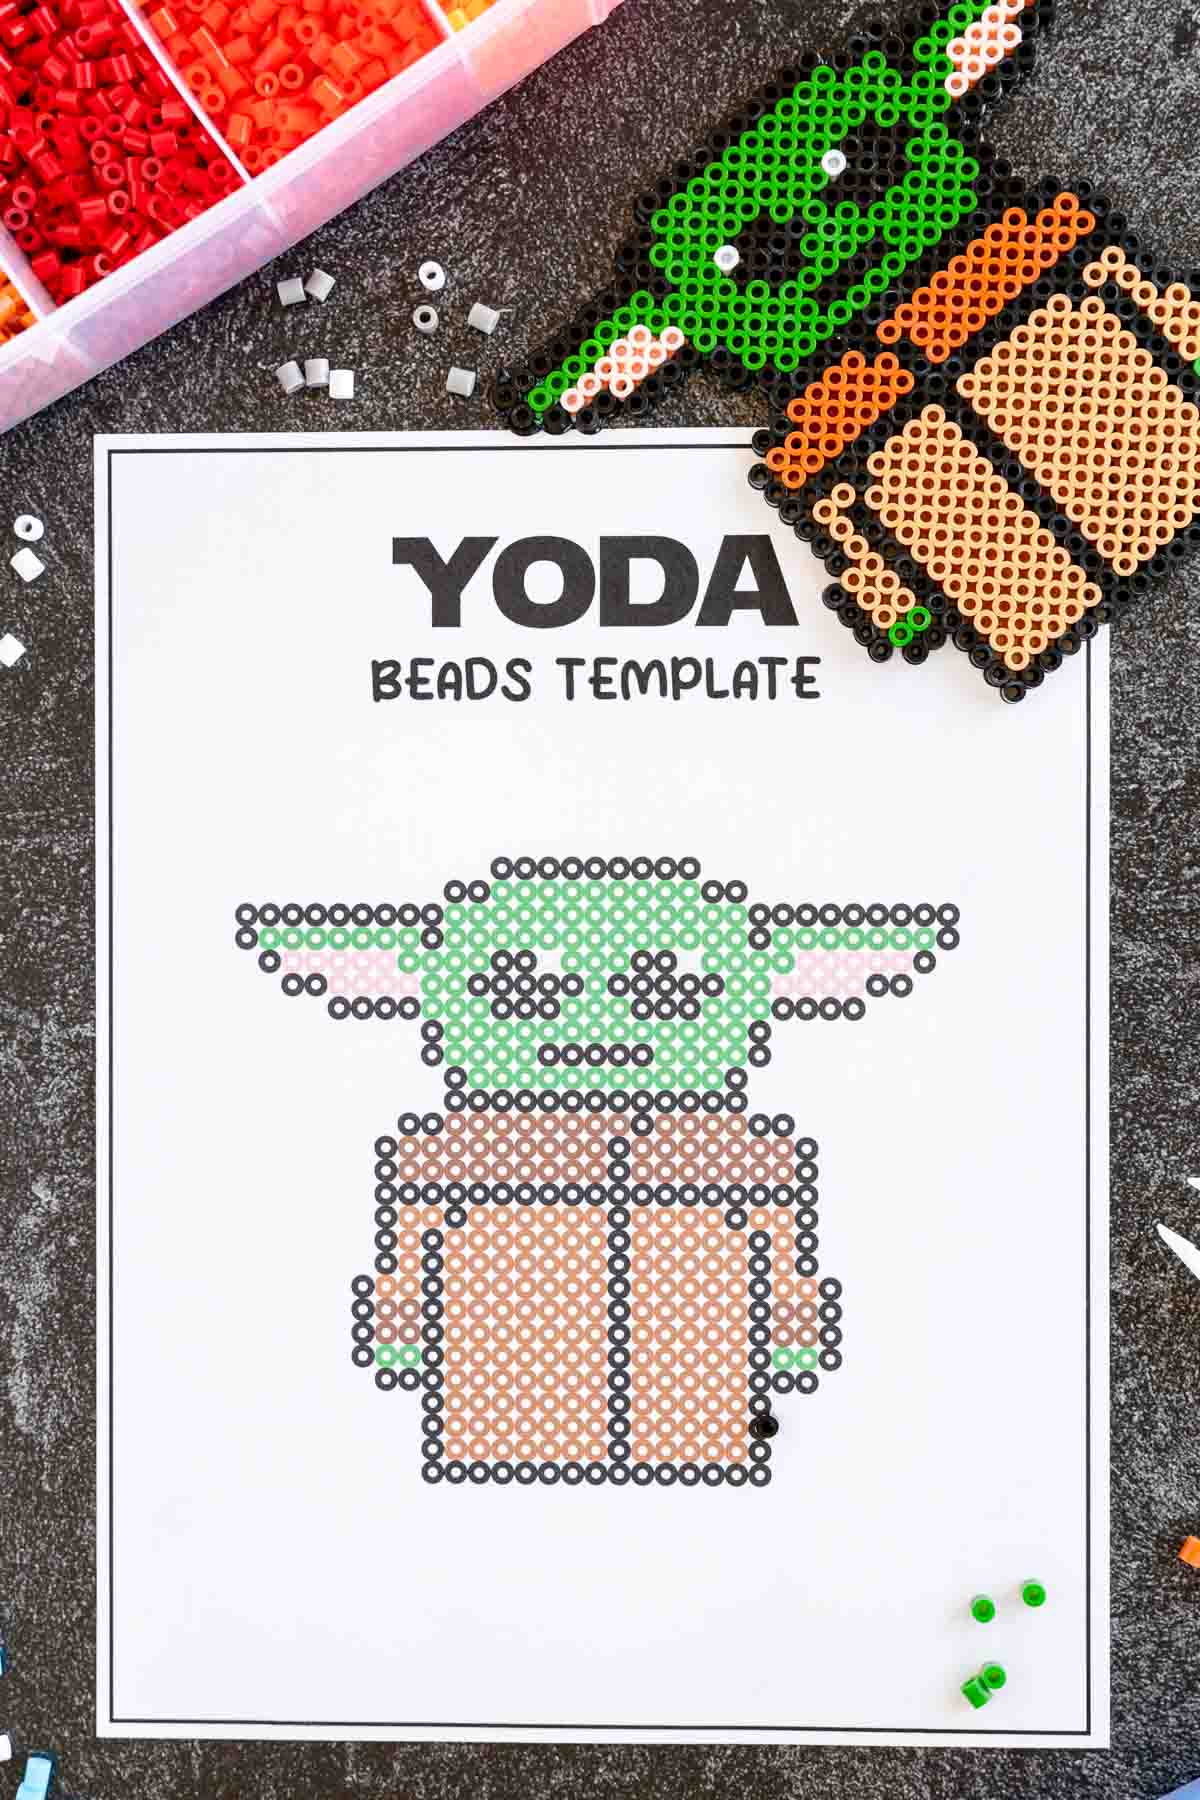 Yoda Star Wars perler bead pattern and complete guy